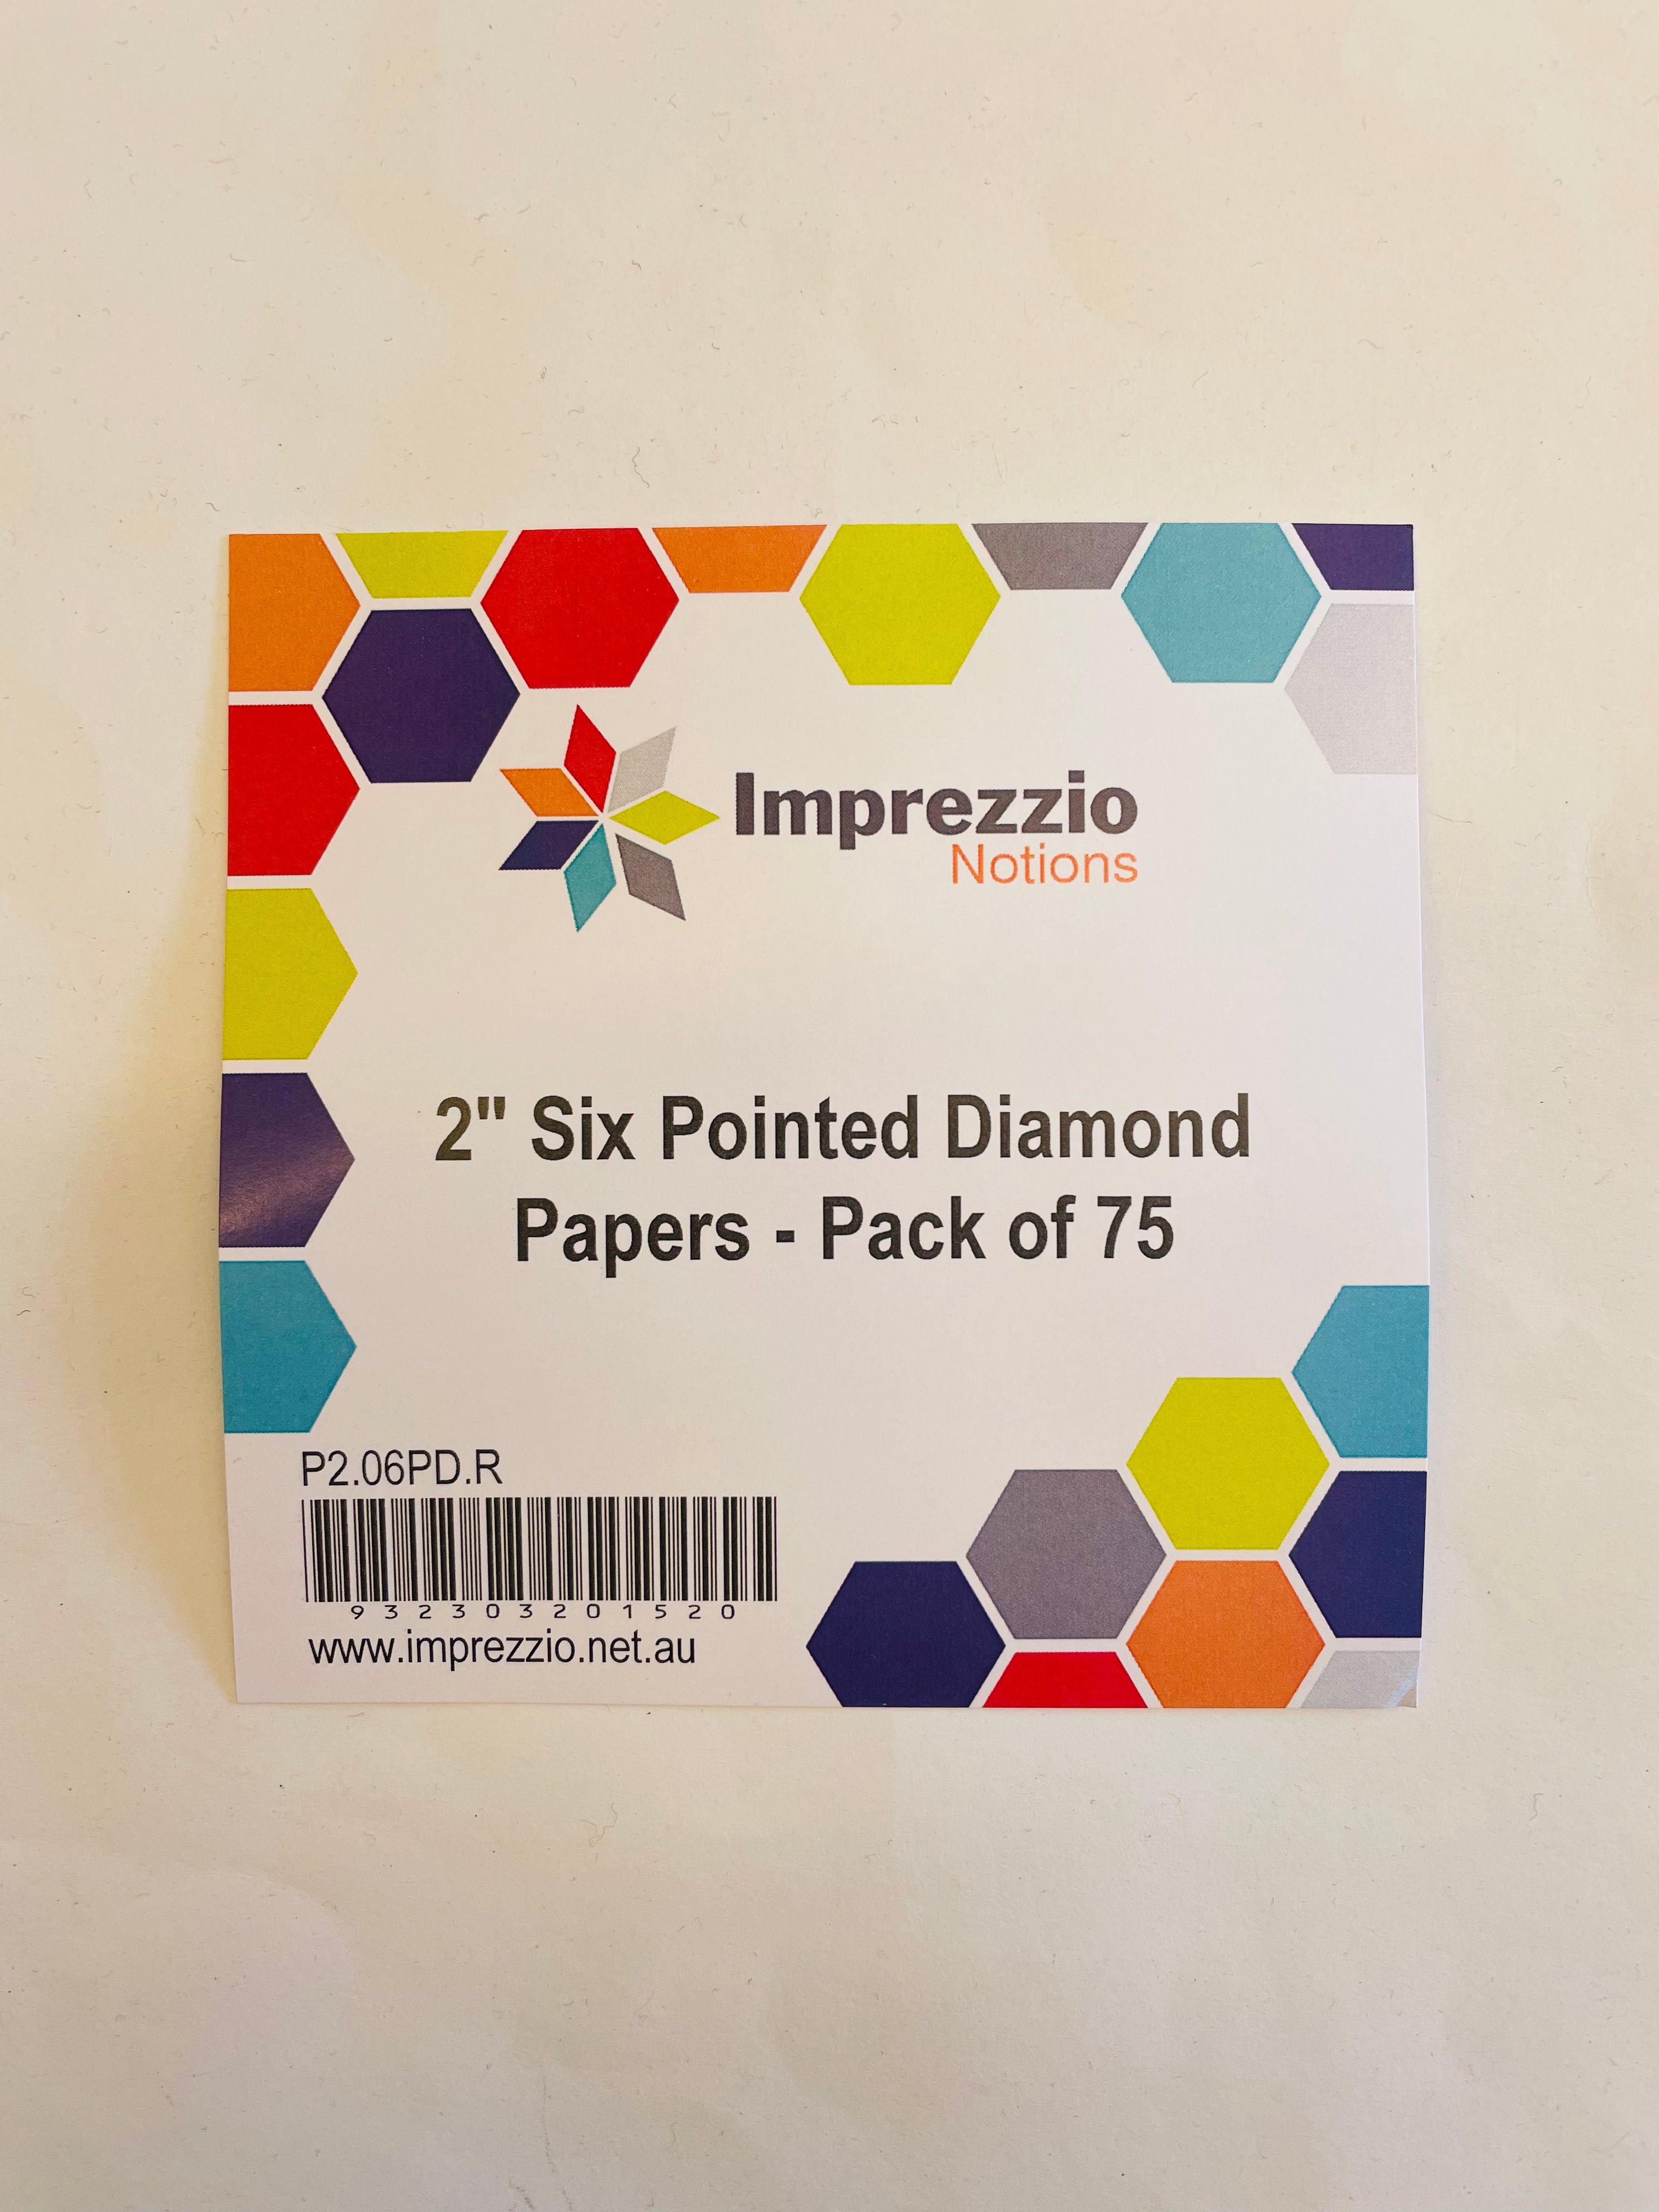 2” Six Pointed Diamond Papers